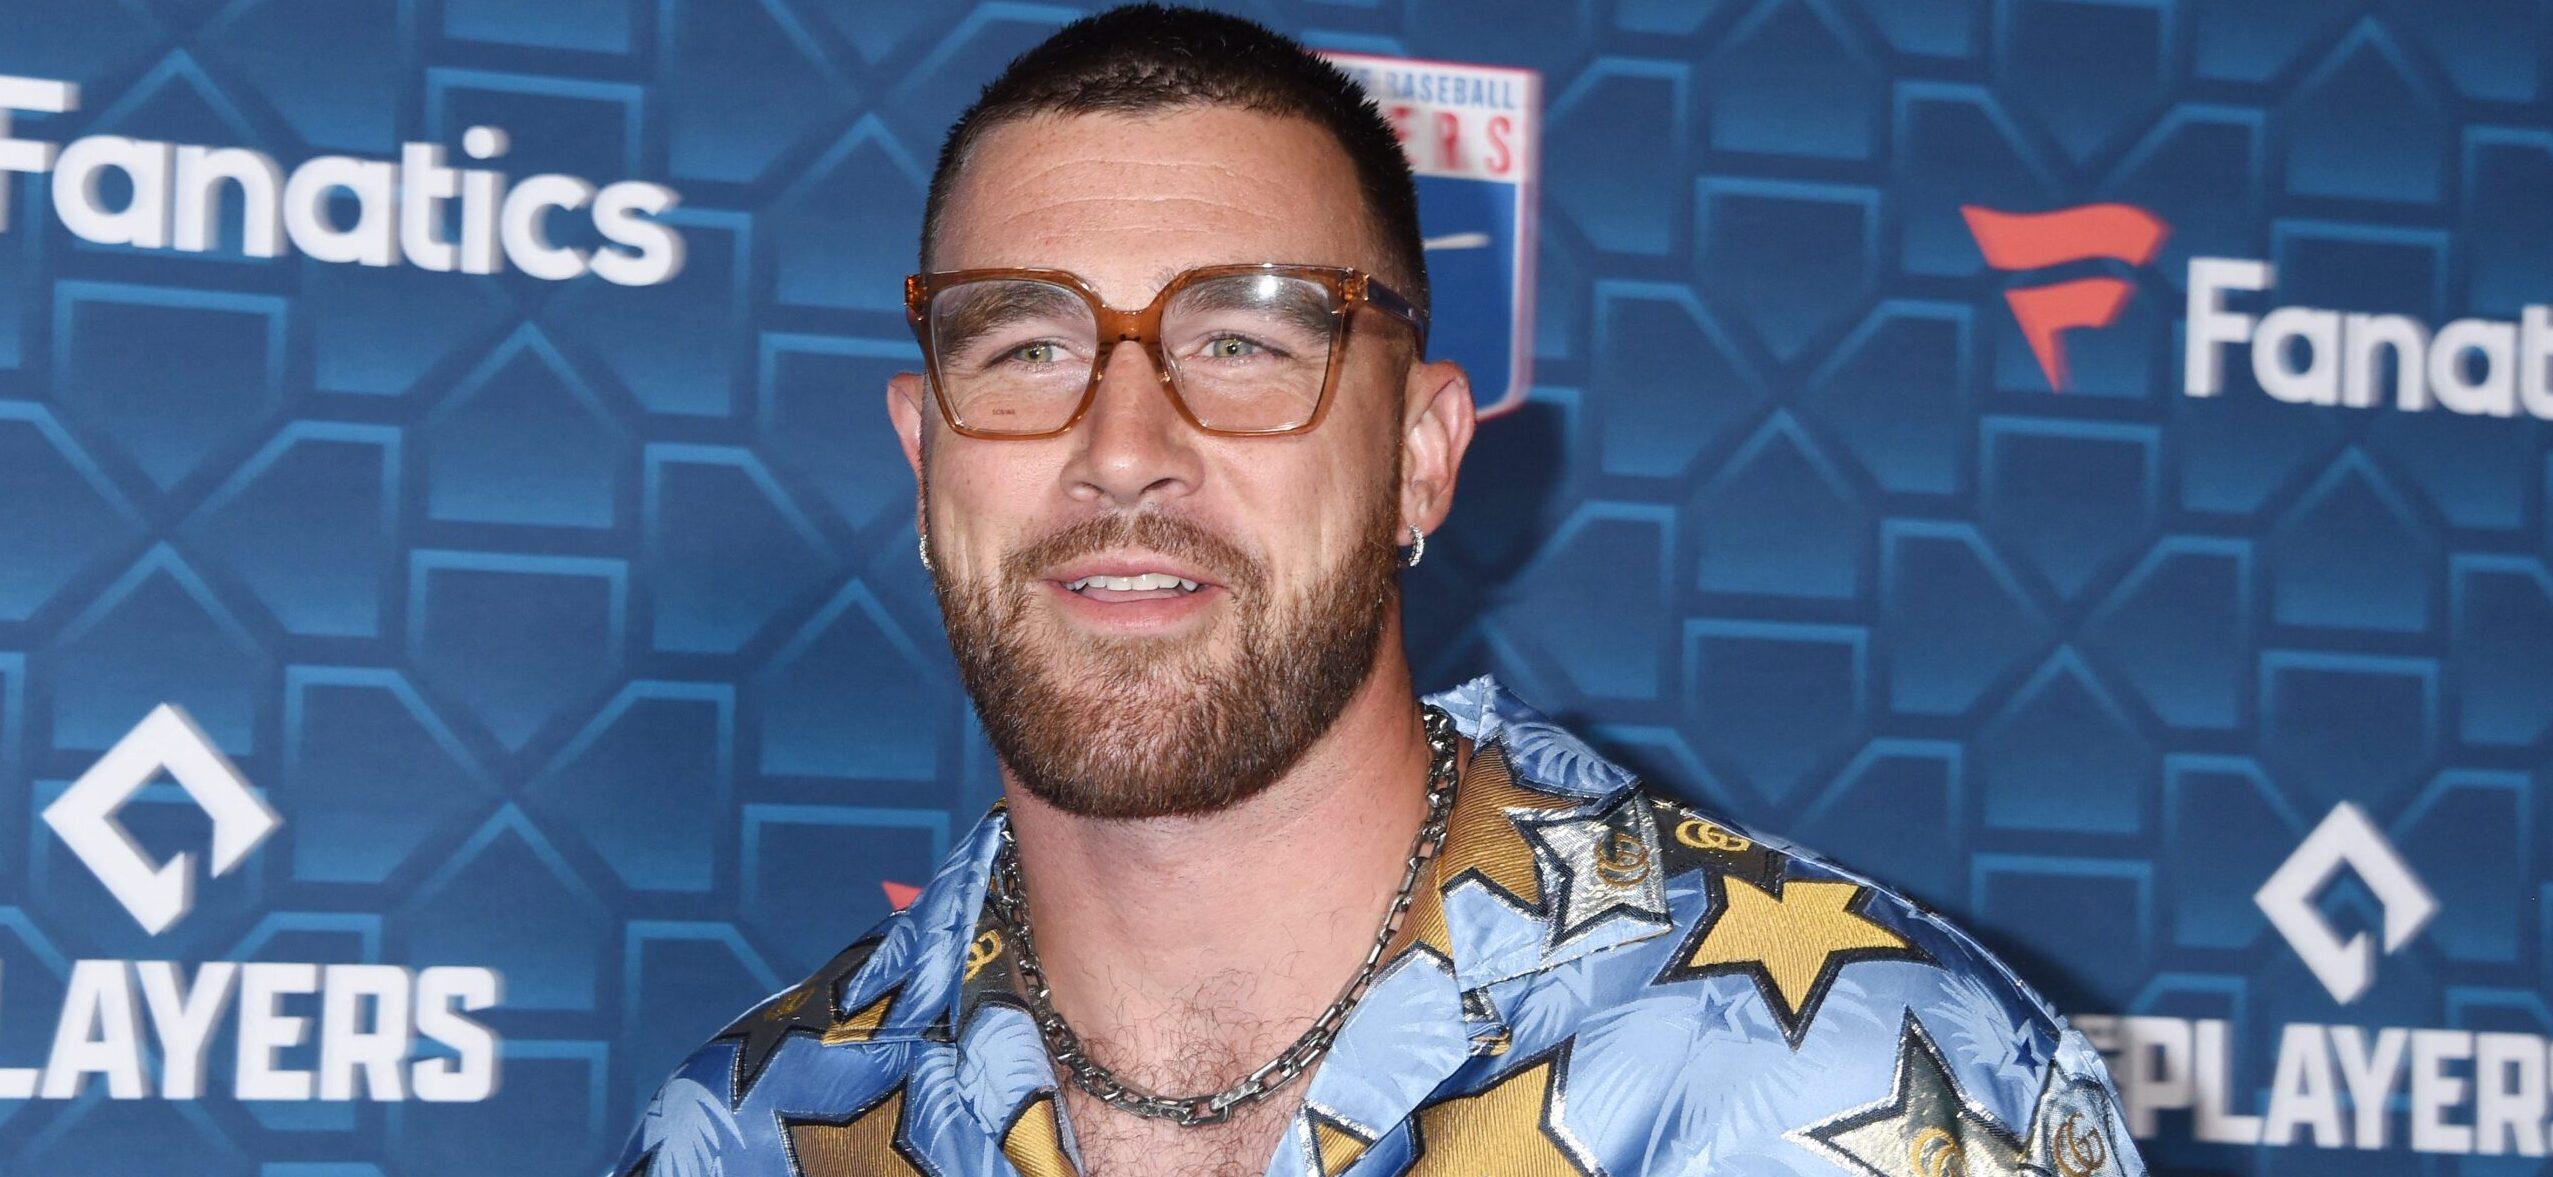 NFL’s Travis Kelce Reveals His Insane Game-Day Fashion Ritual